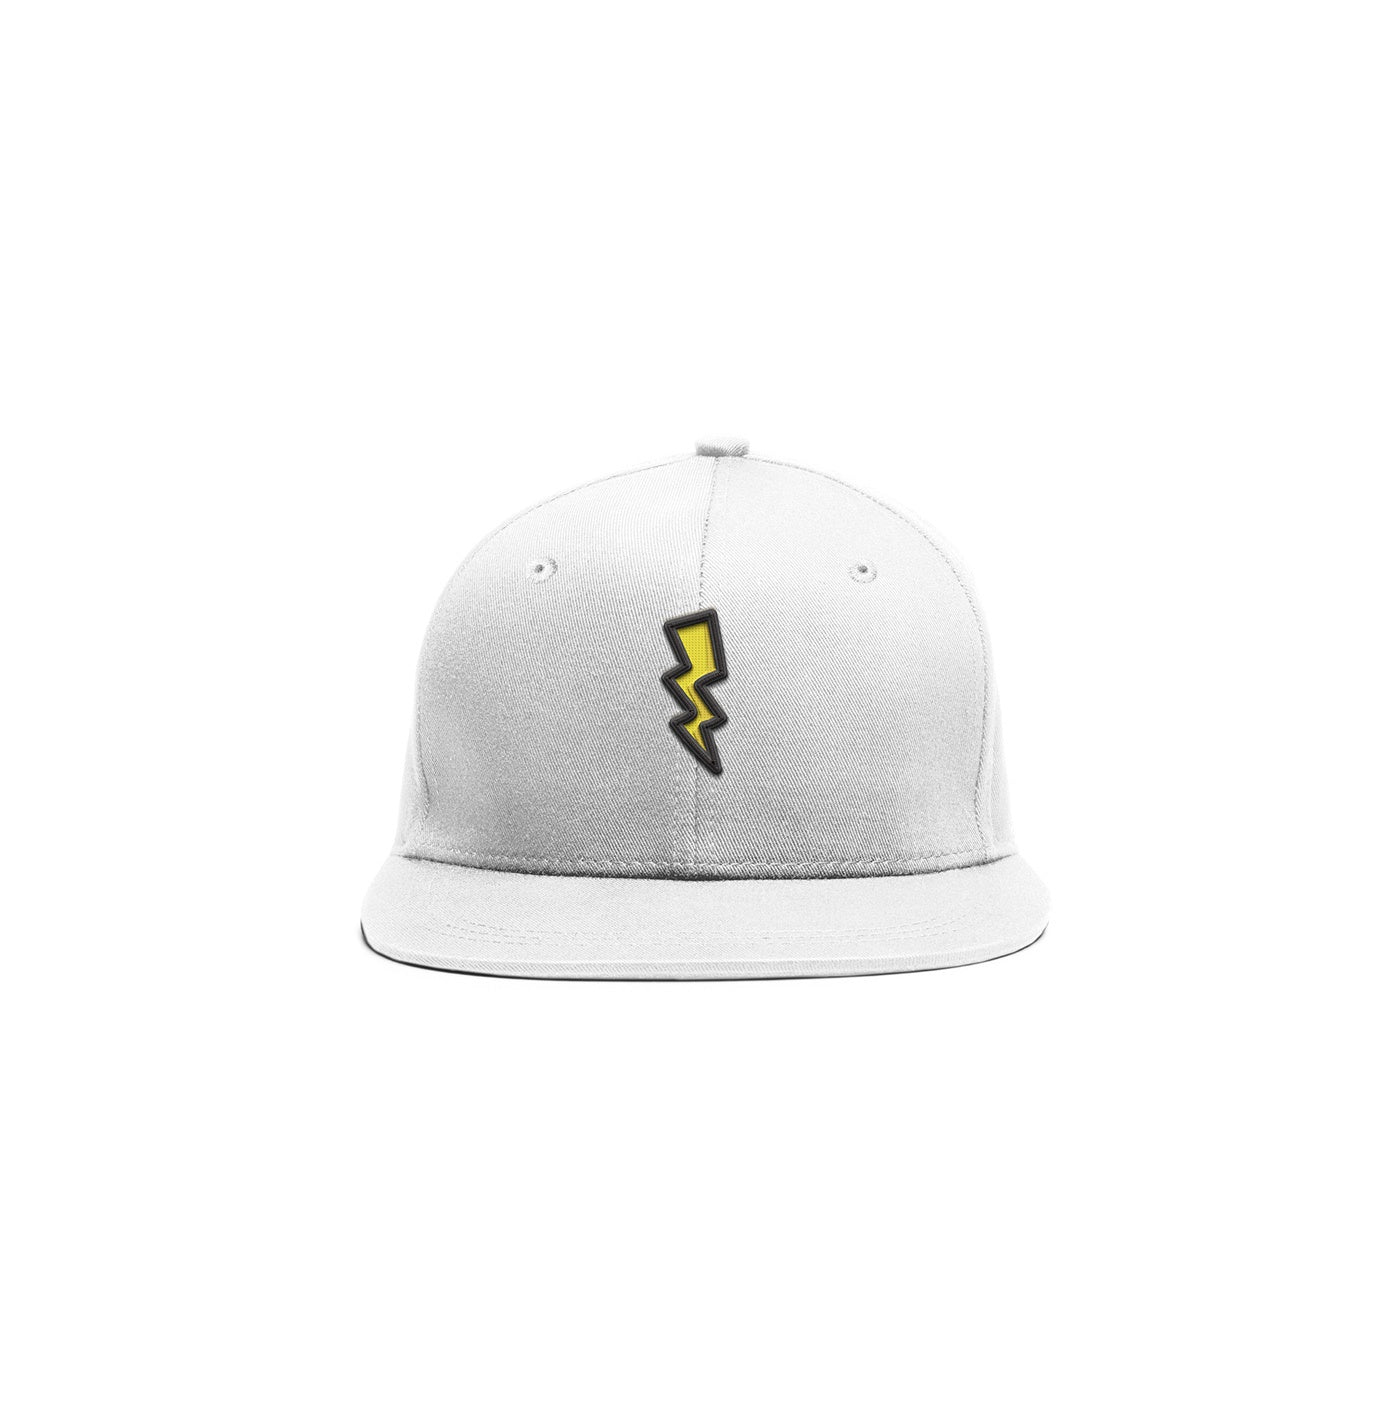 Embroidered Thunder Cap